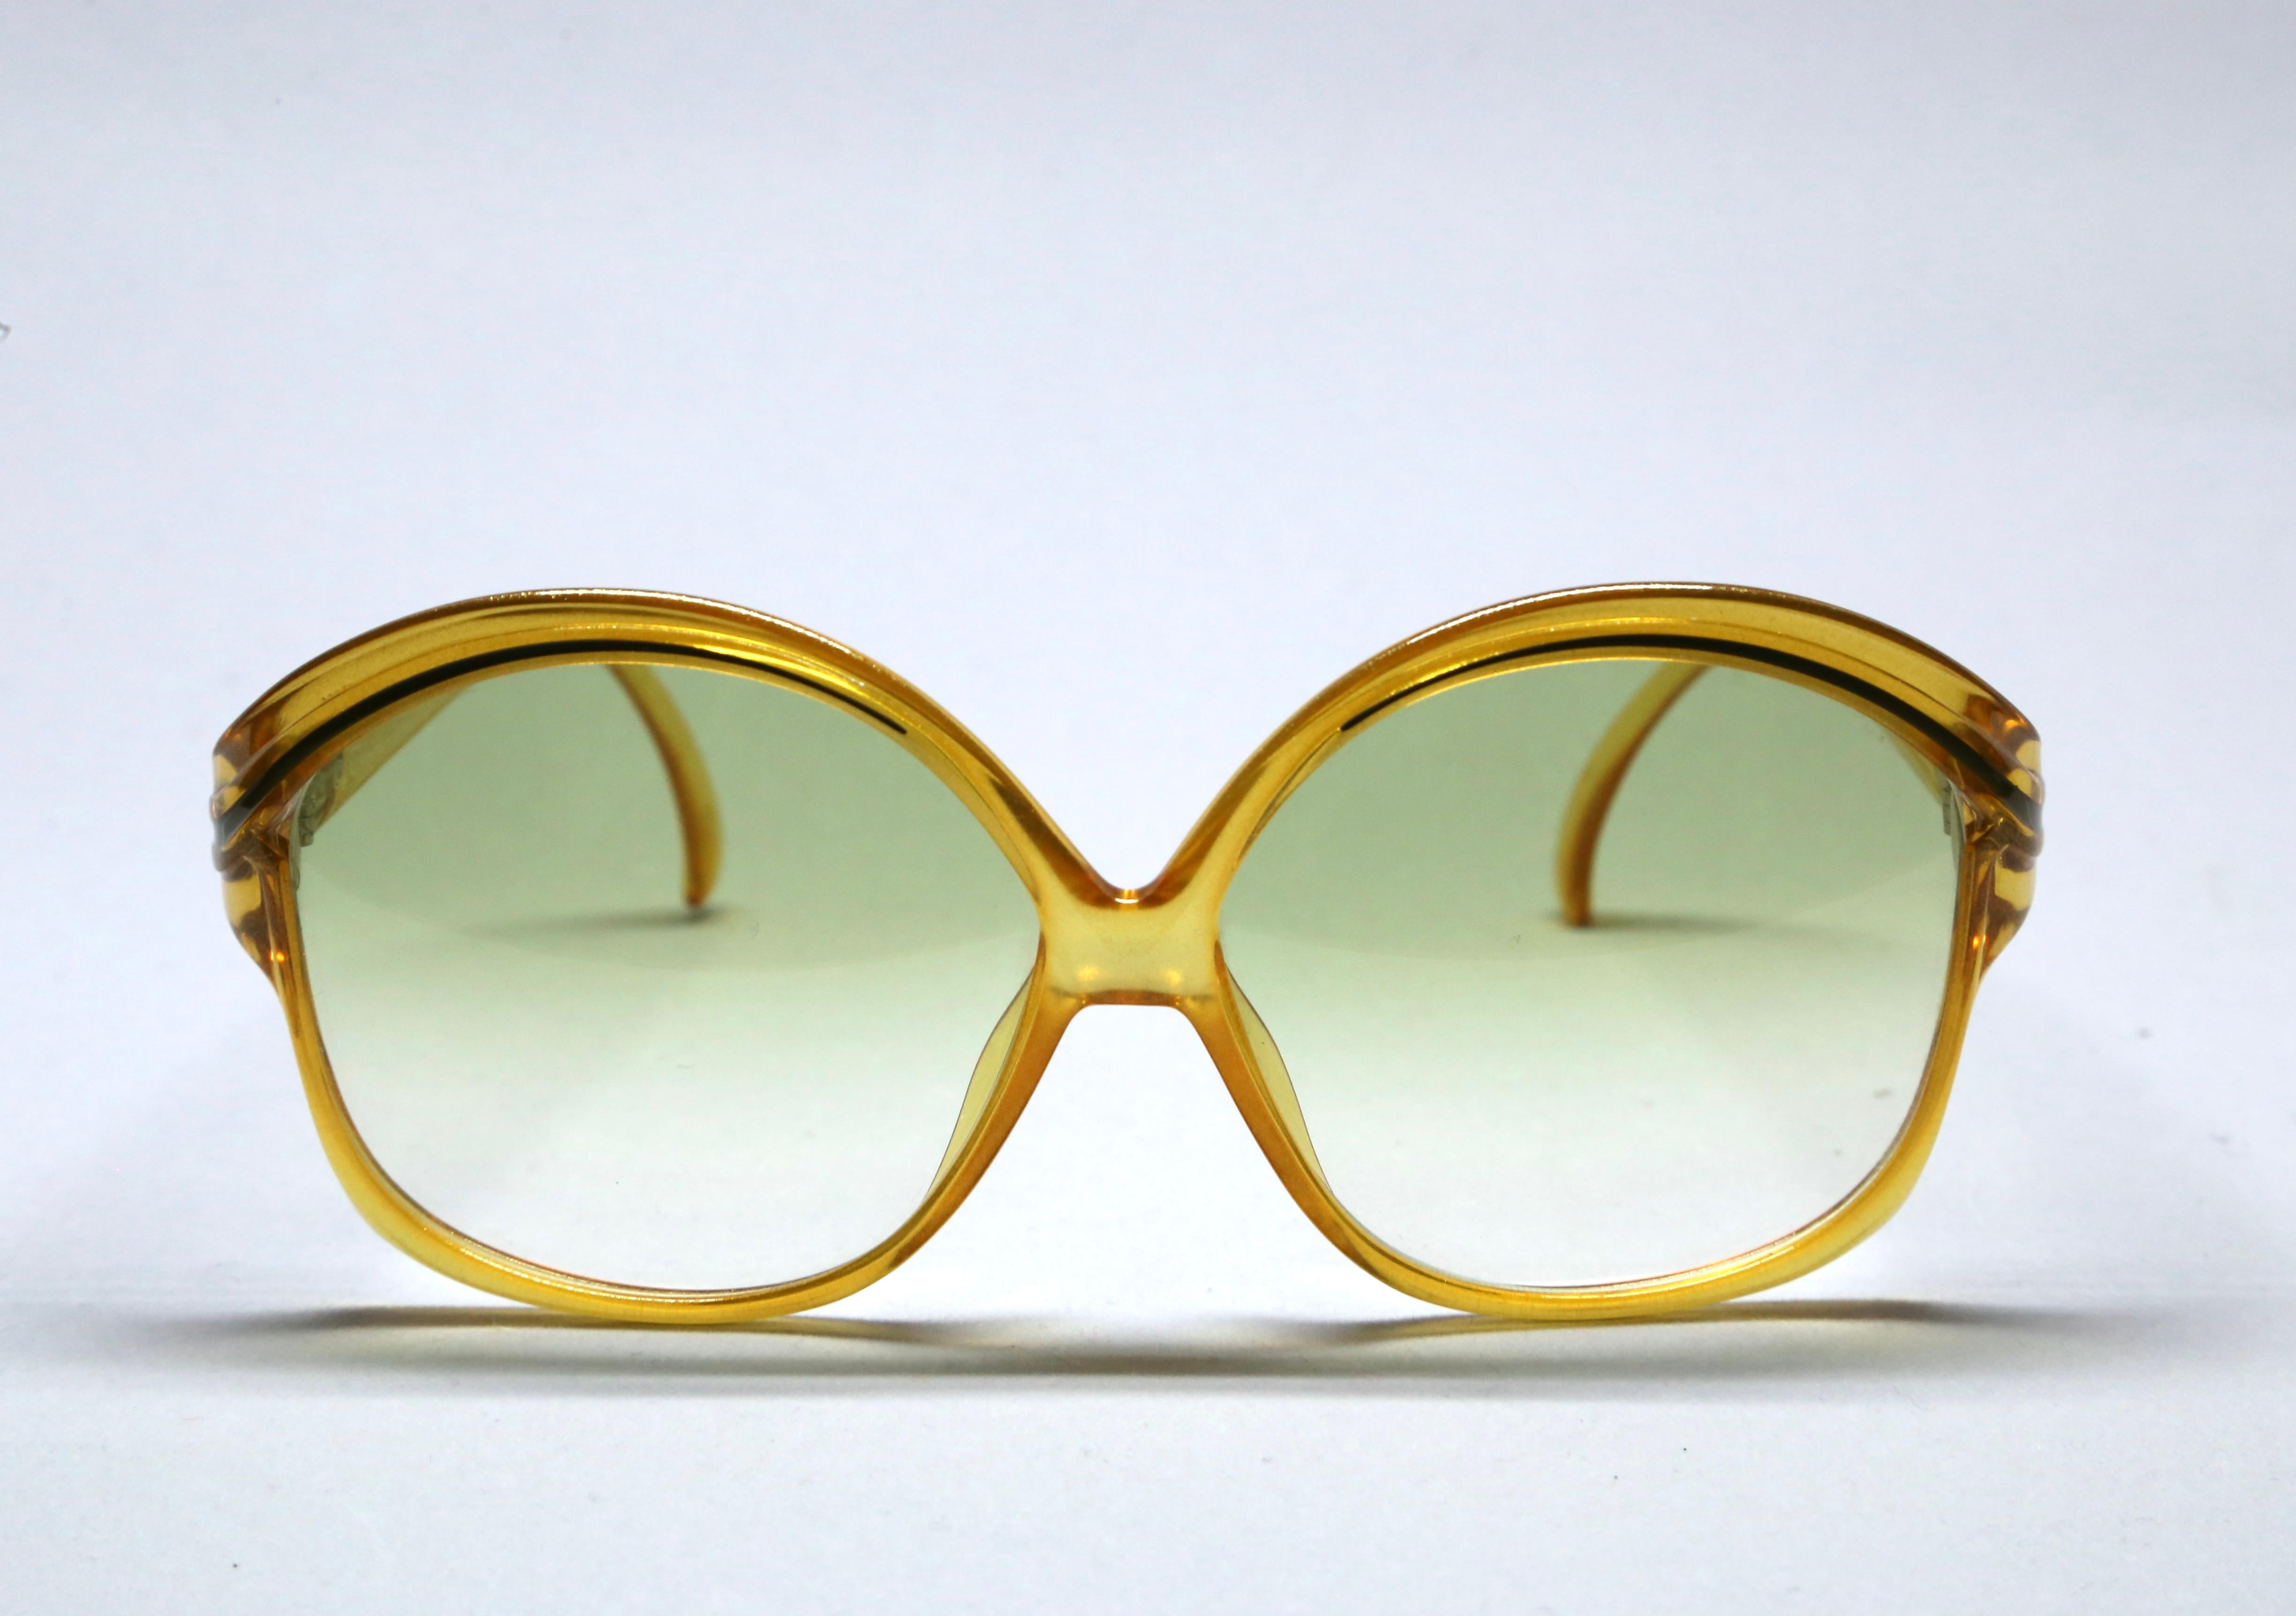 Oversized, transparent amber-yellow acetate sunglasses with black accents and green gradient lenses from Christian Dior dating to the 1970's.  Approximate measurements: Frame width 142 cm and length 64 mm; Arm length 120mm. Made in Germany. New/old